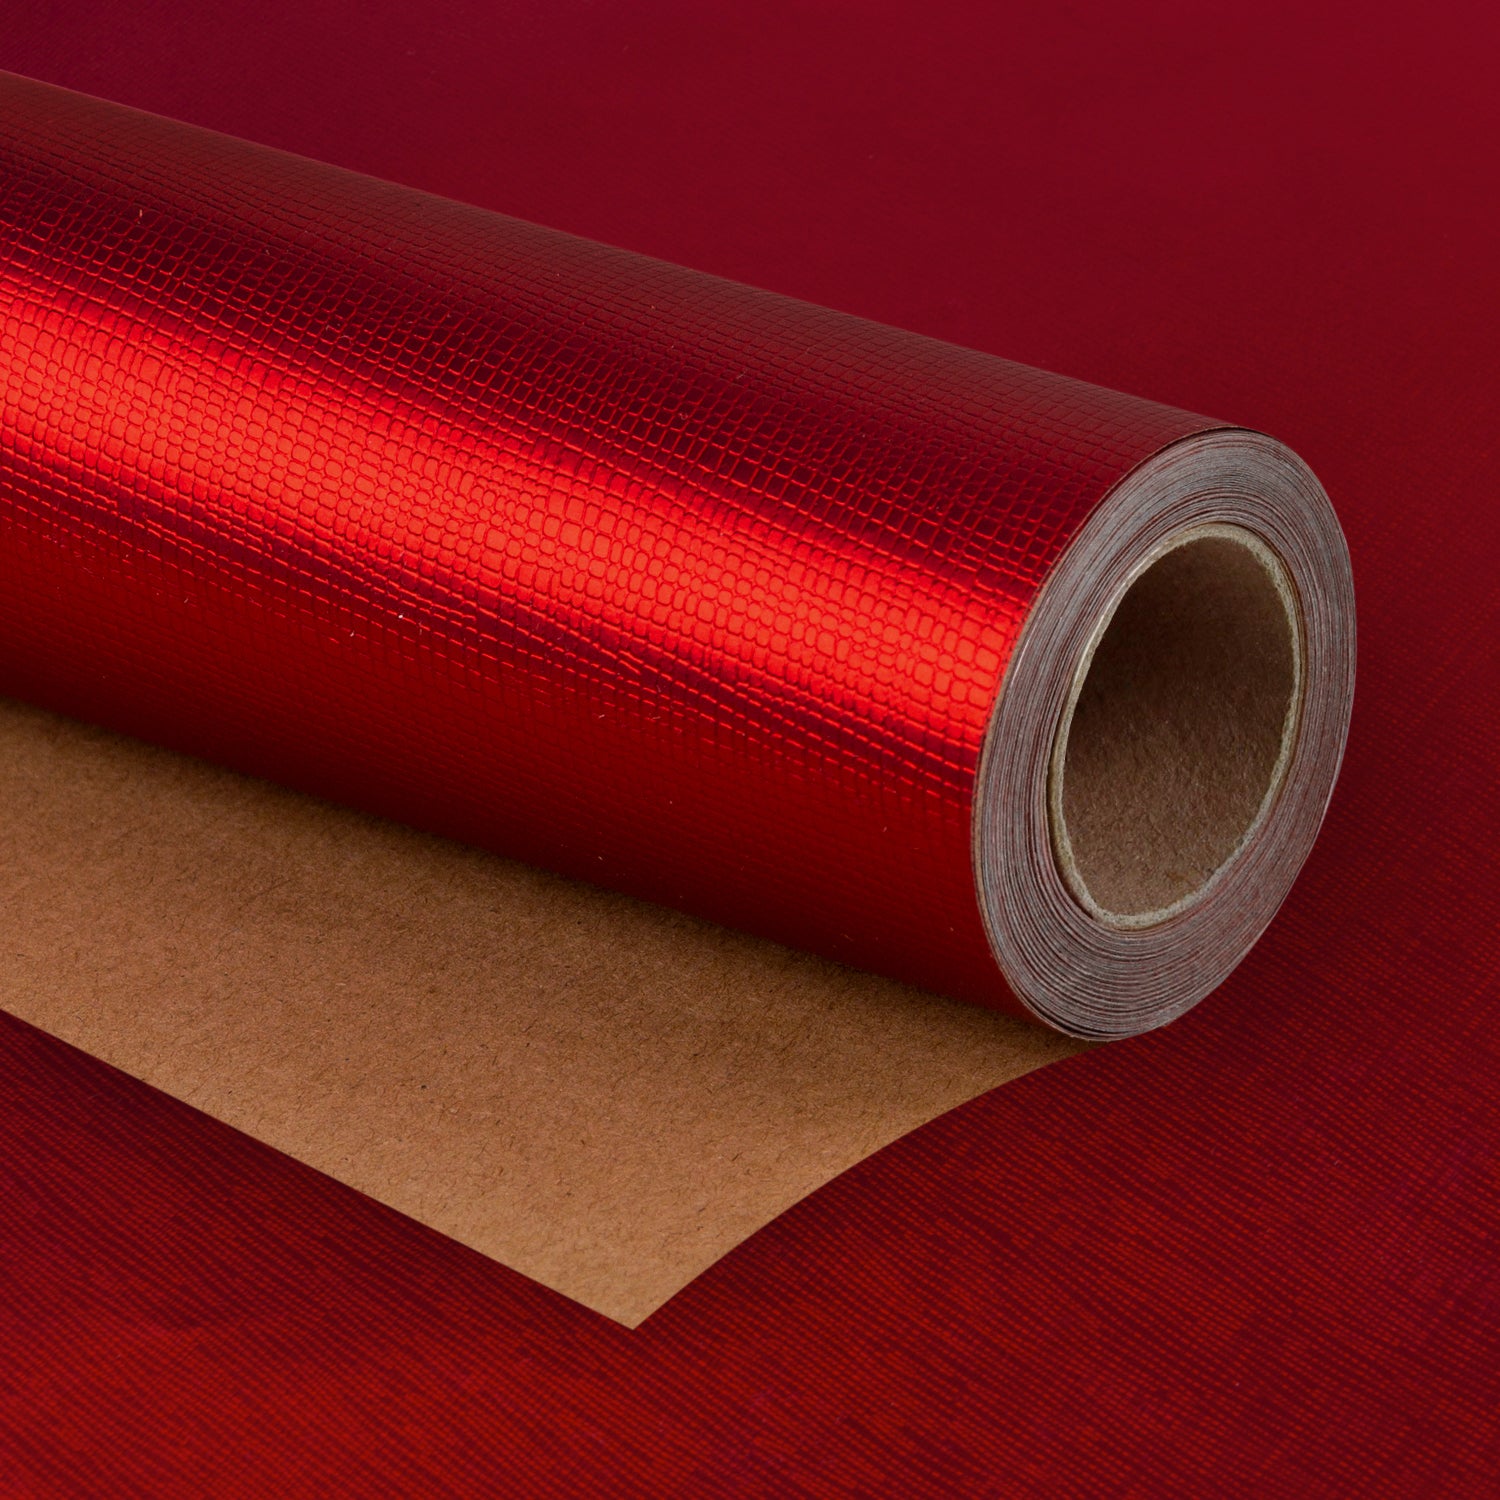 Embossed Cross Grain Wrapping Paper Roll Red Ream Wholesale Wrapaholic